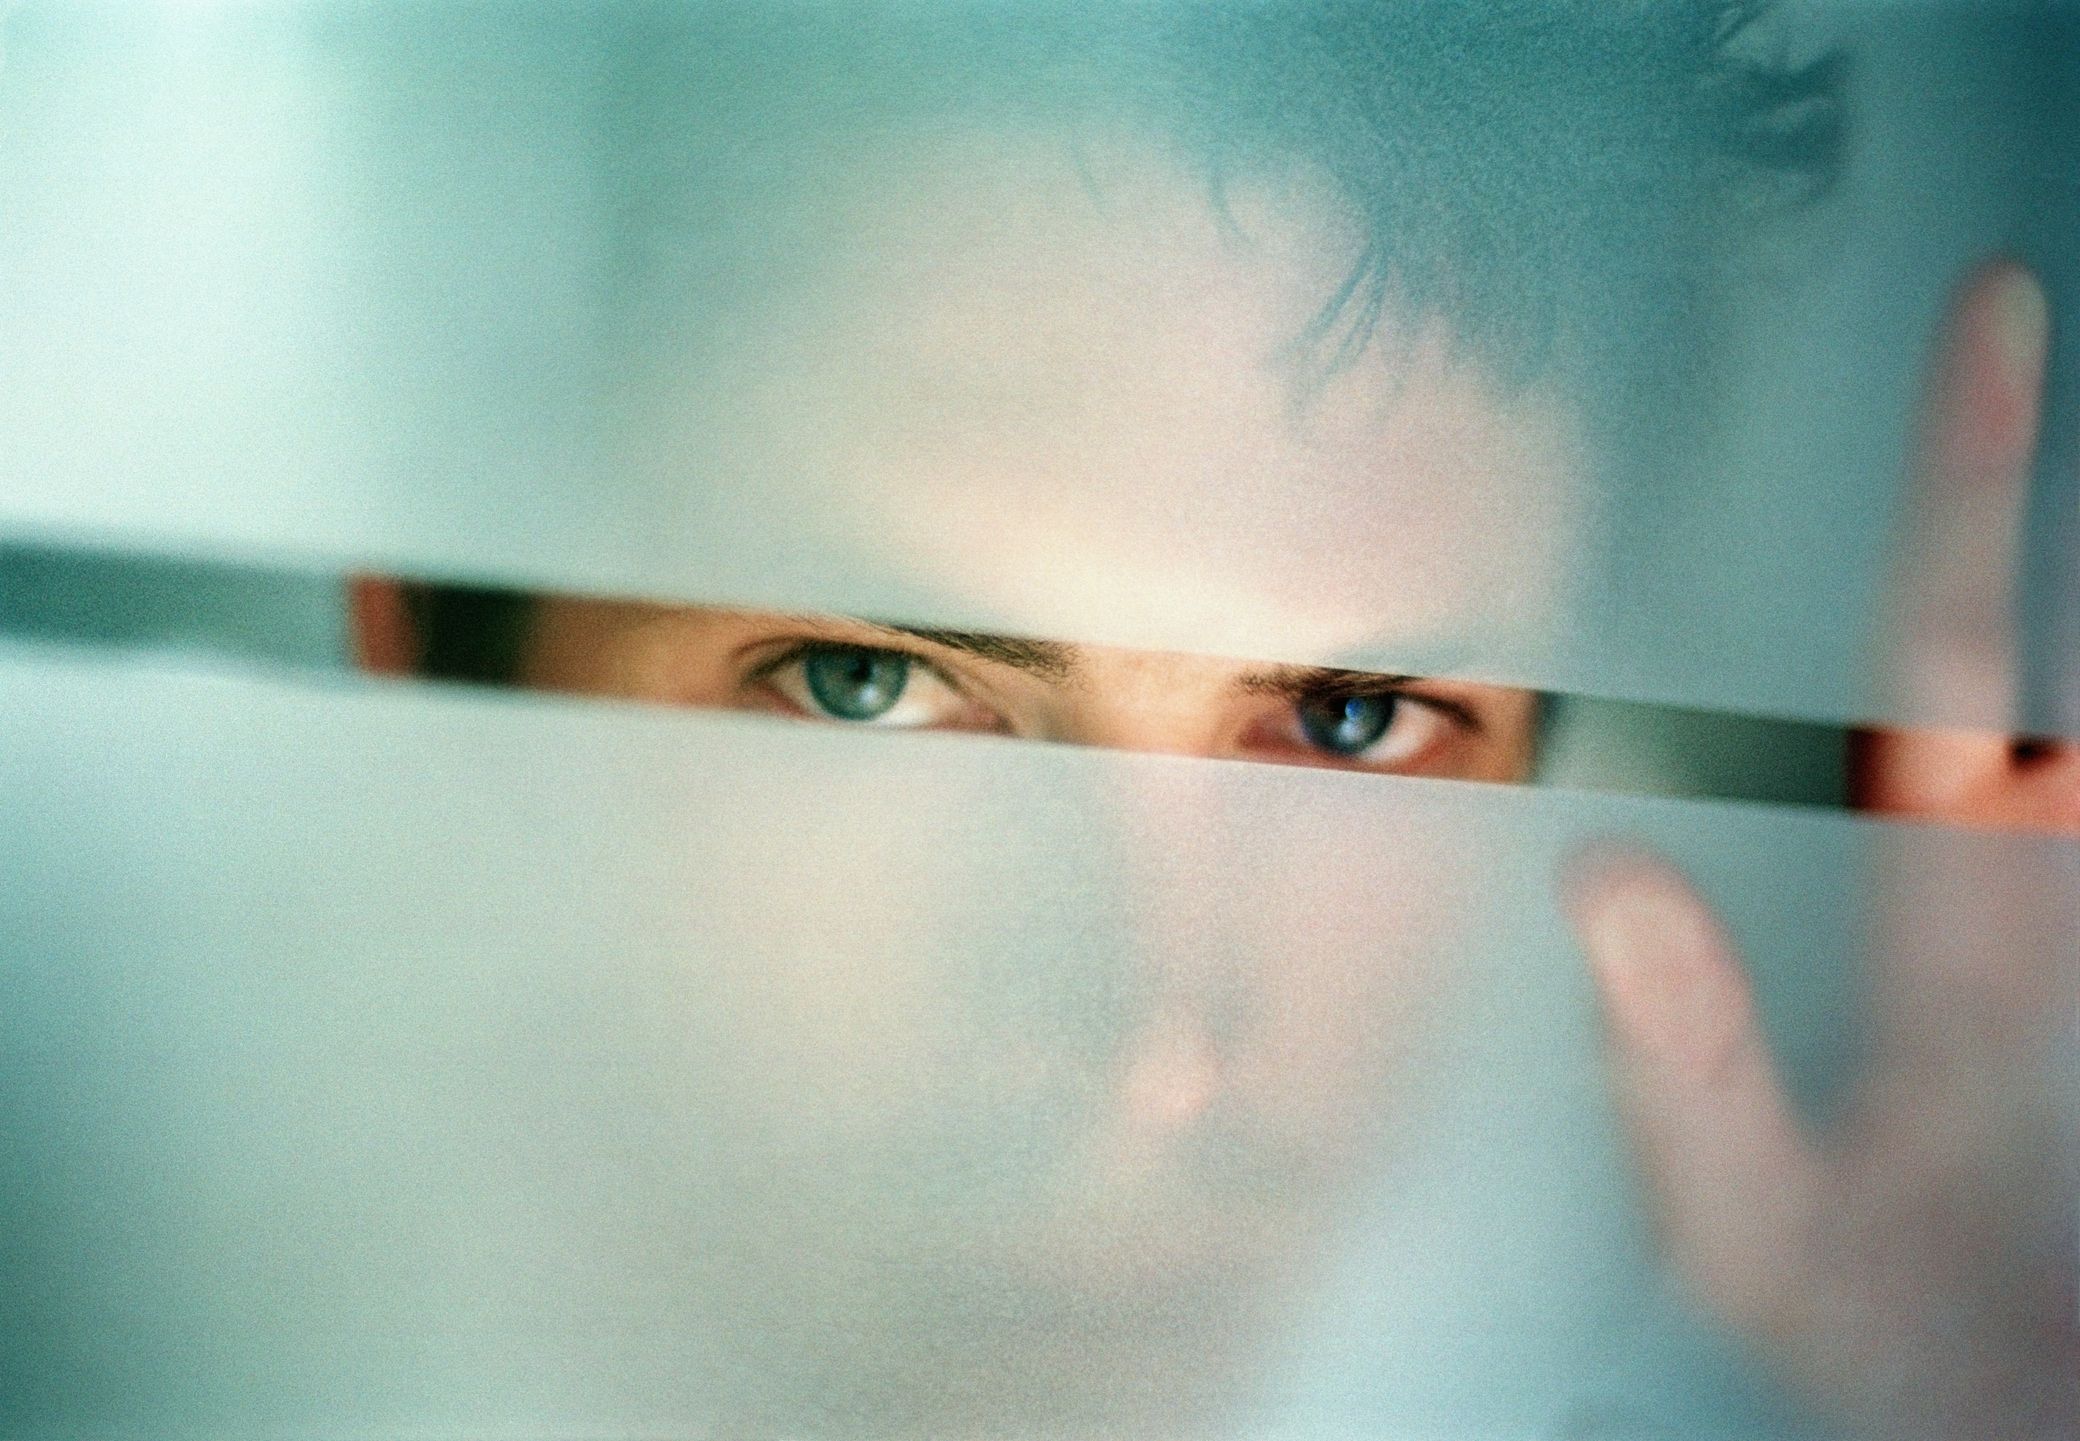 man peering through gap in frosted glass, portrait, close up